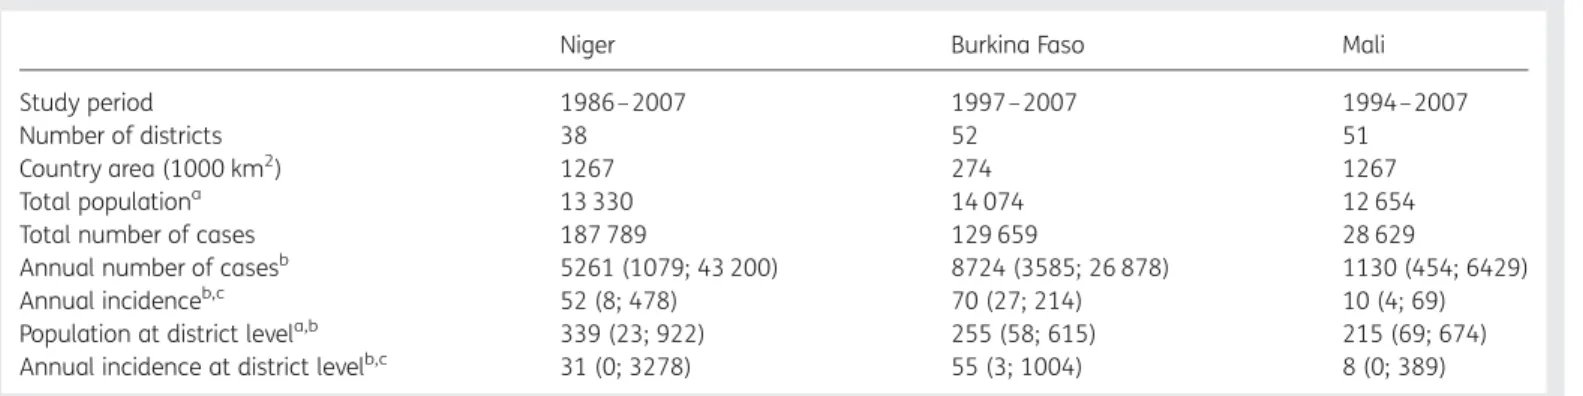 Table 1. General and epidemiological country-level characteristics for Niger, Burkina Faso and Mali